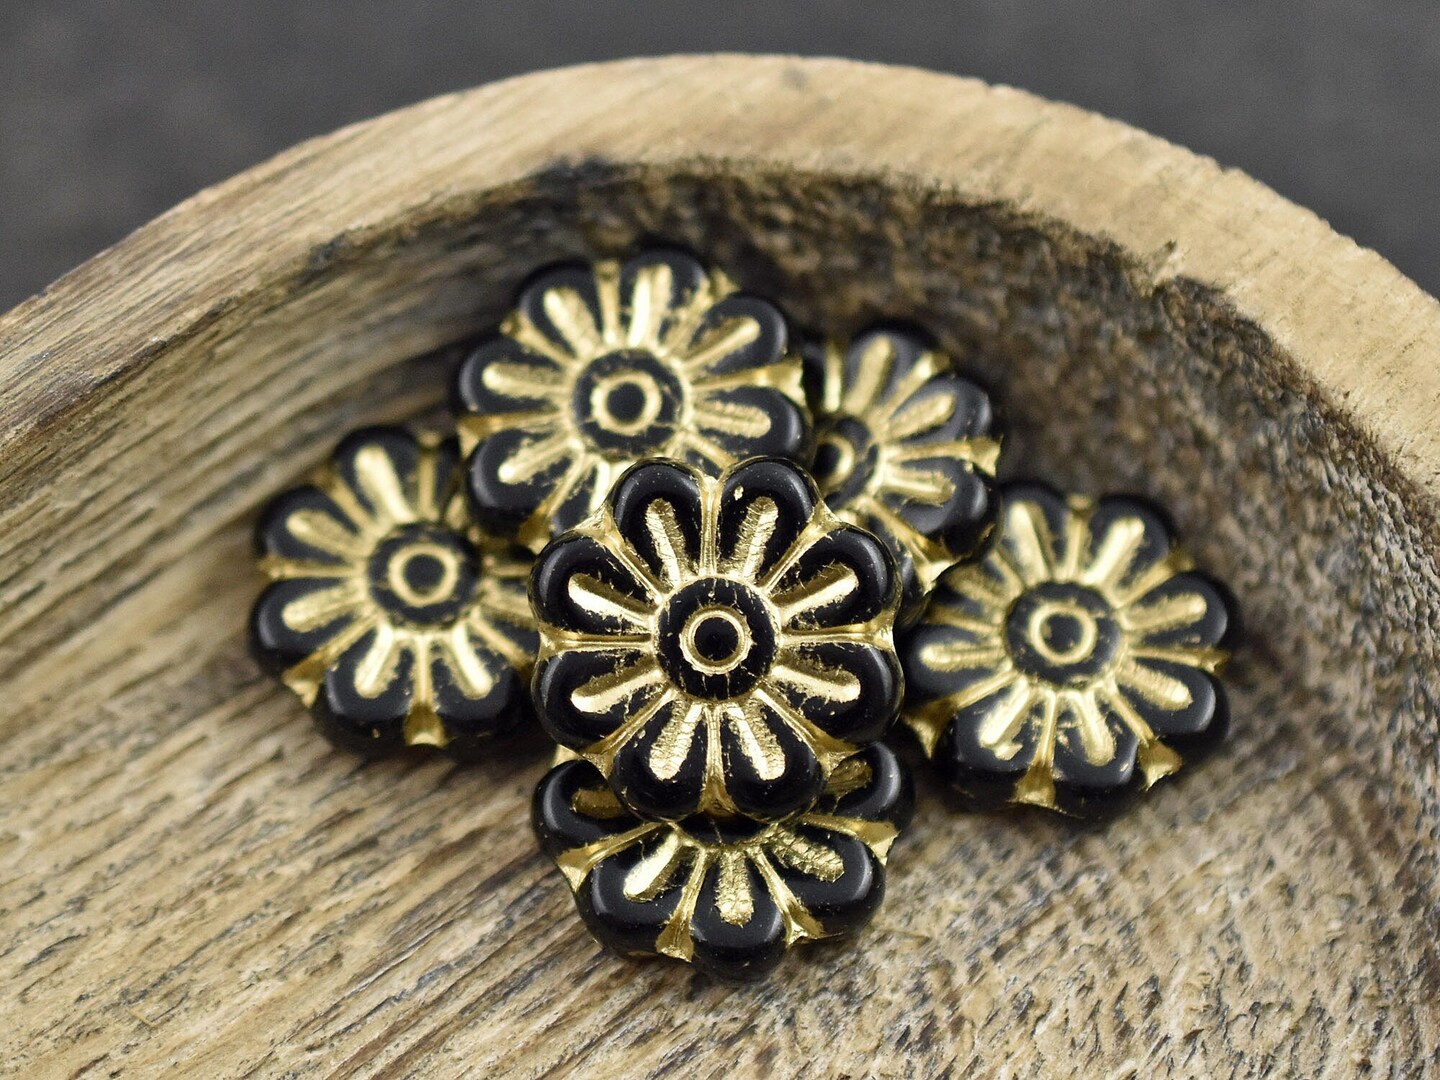 *6* 18mm Gold Washed Opaque Black Daisy Flower Beads